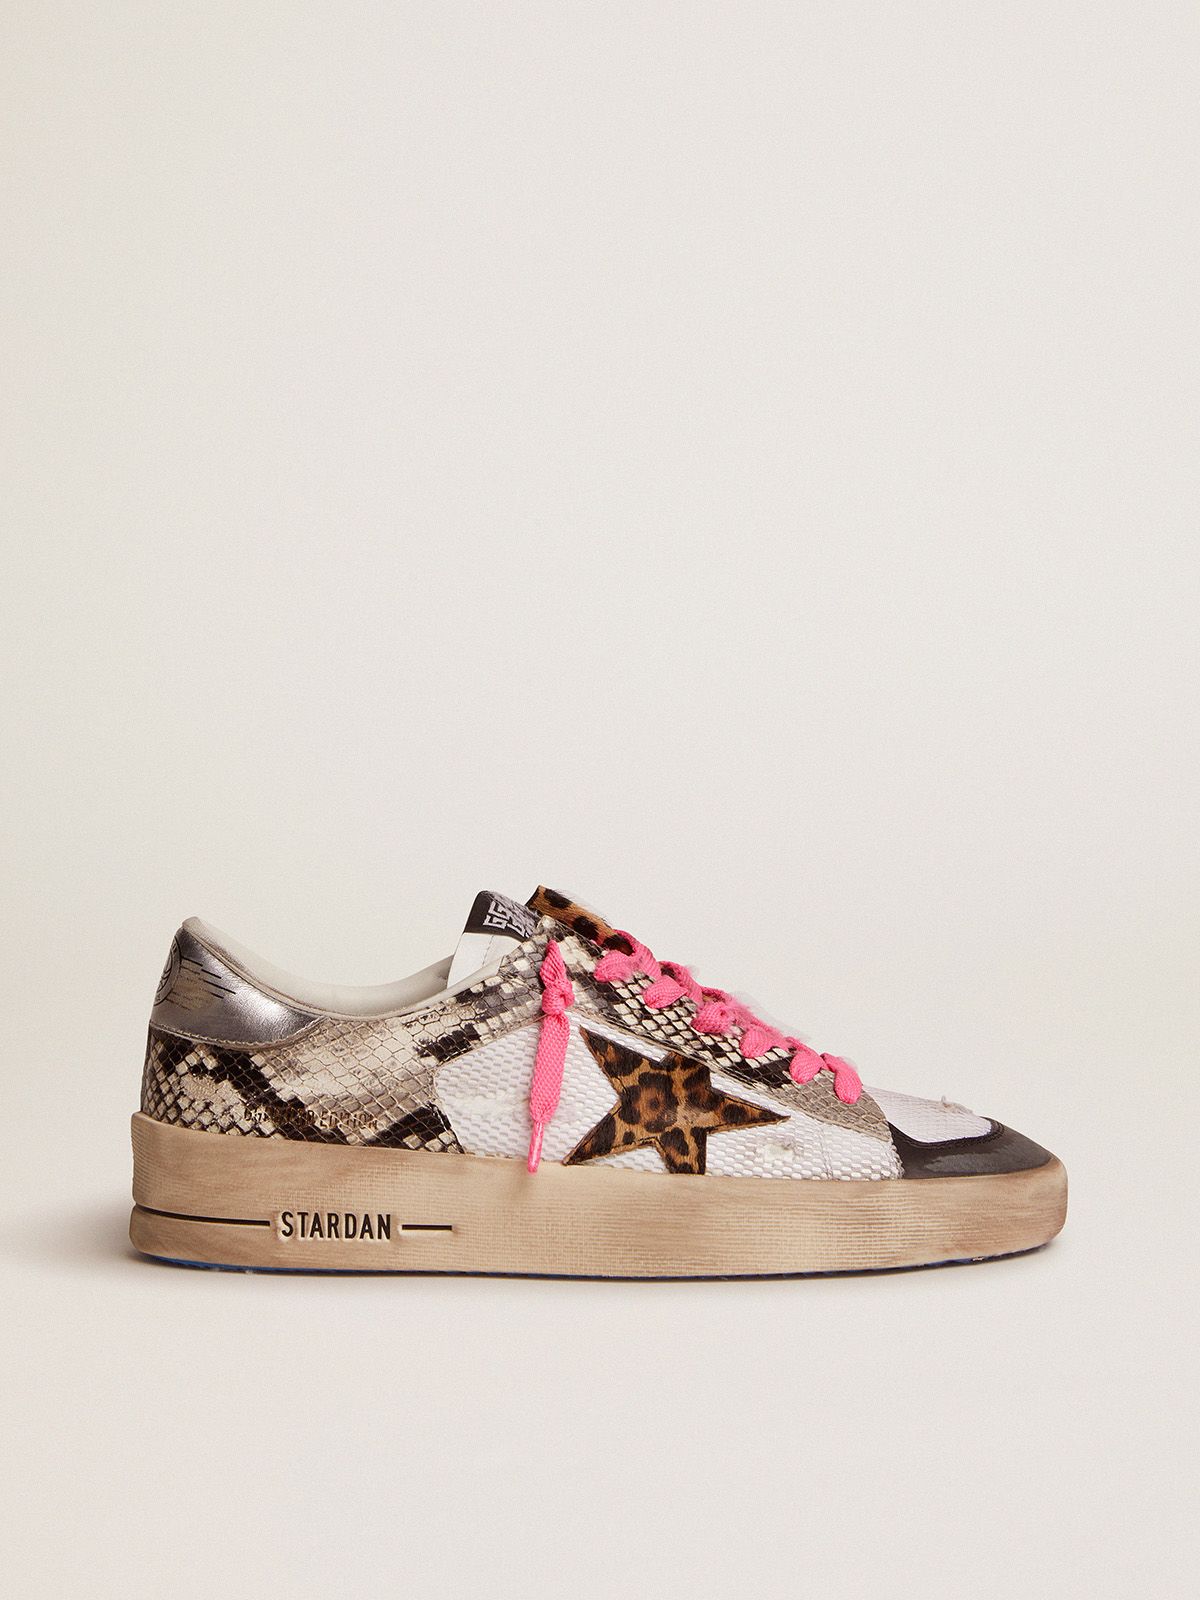 golden goose leather pony LAB snake-print sneakers skin with star upper and leopard-print Stardan